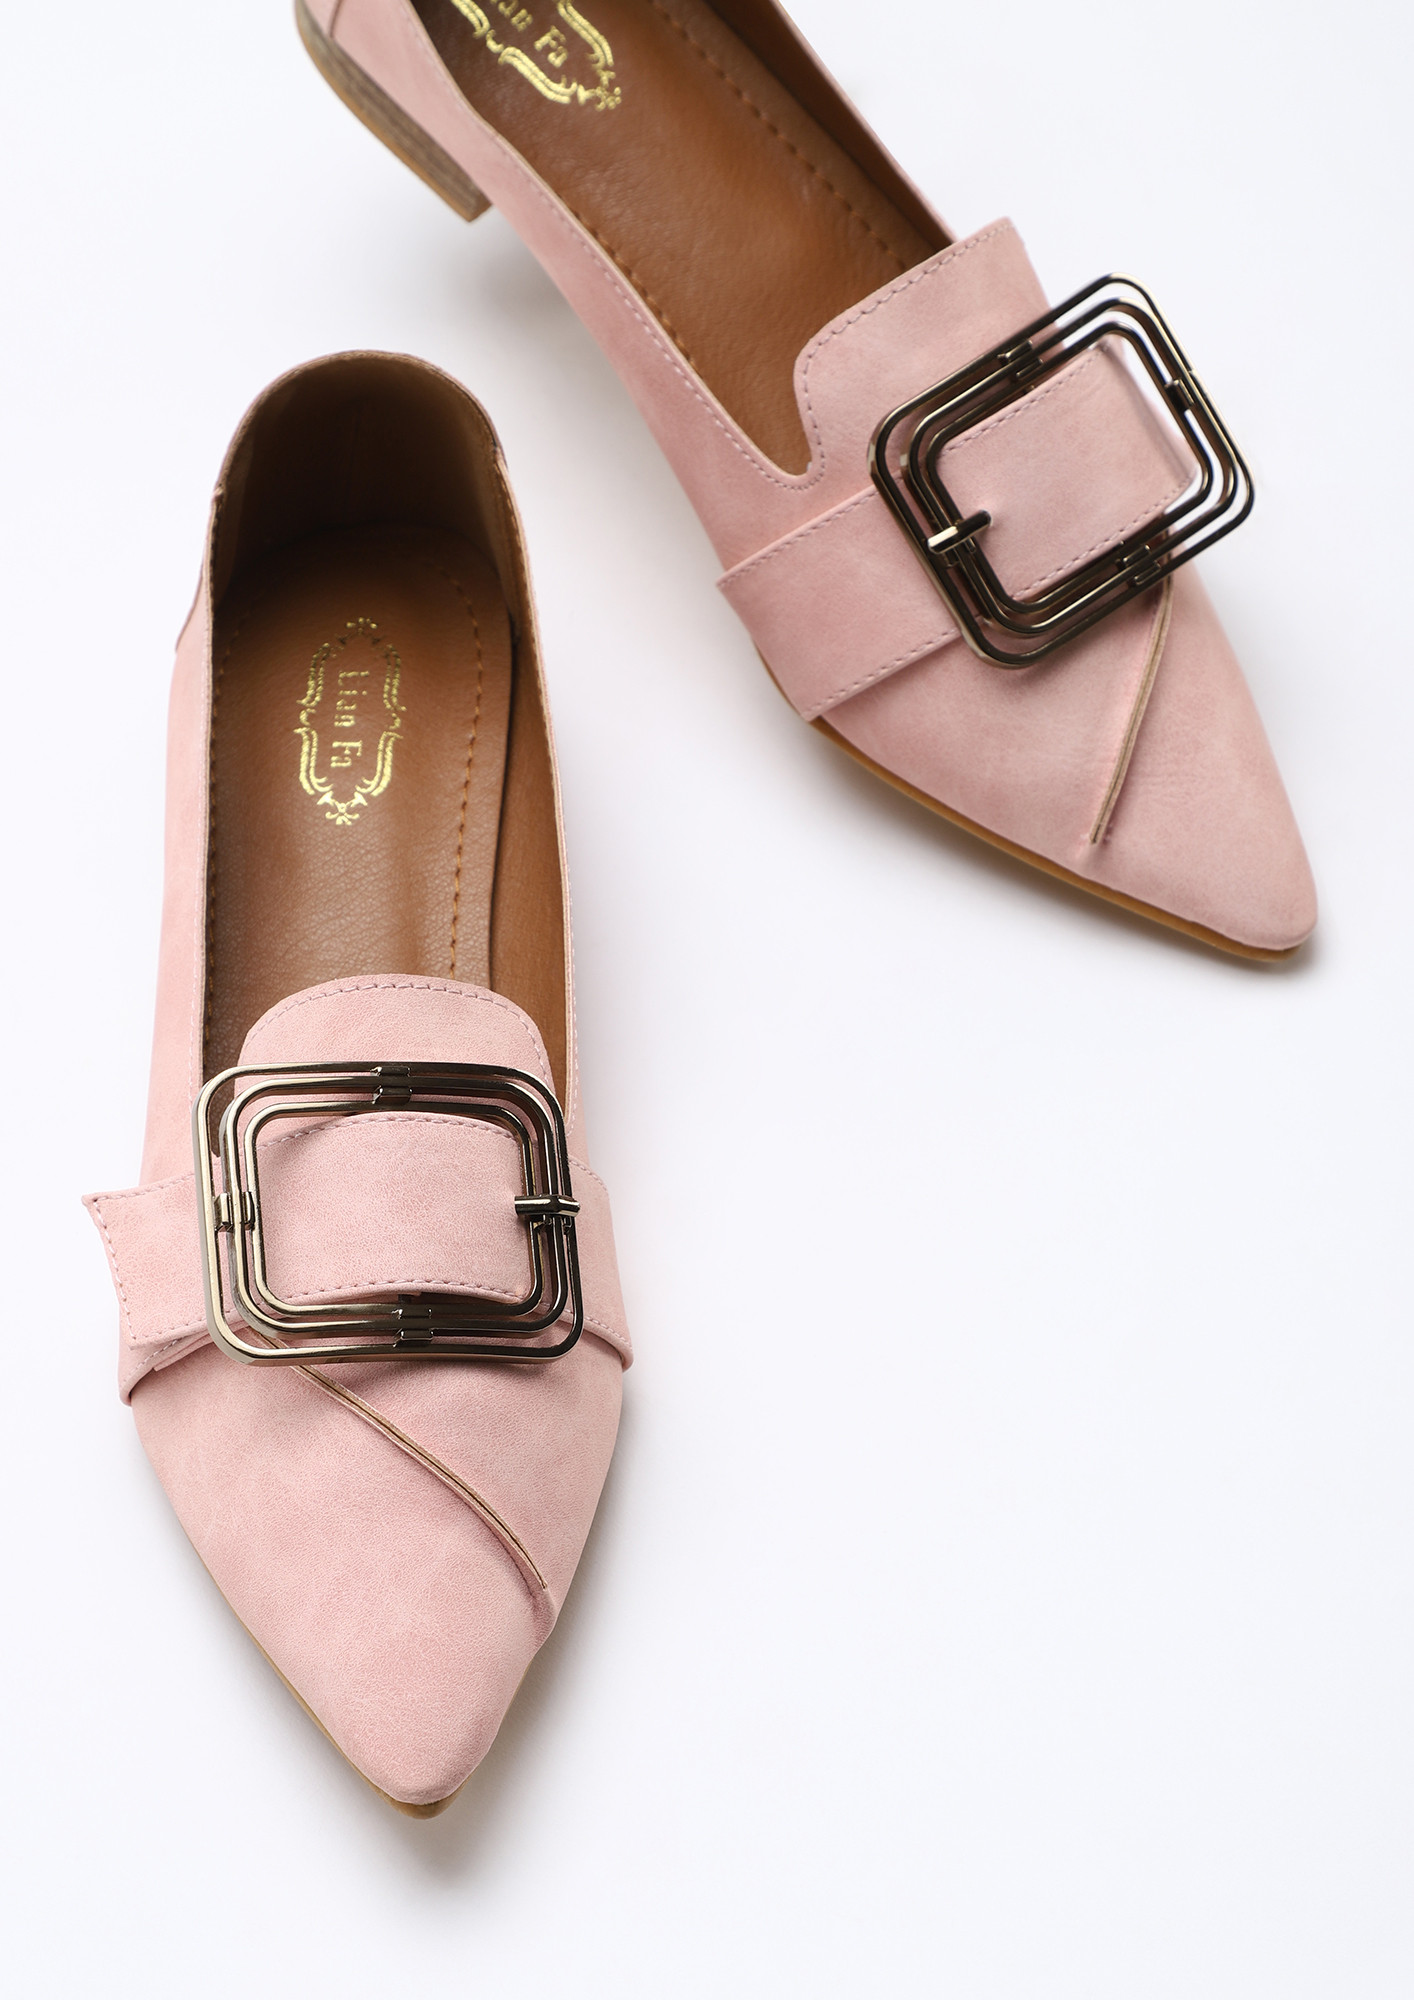 BUCKLE UP THE THOUGHTS PINK FLAT SHOES